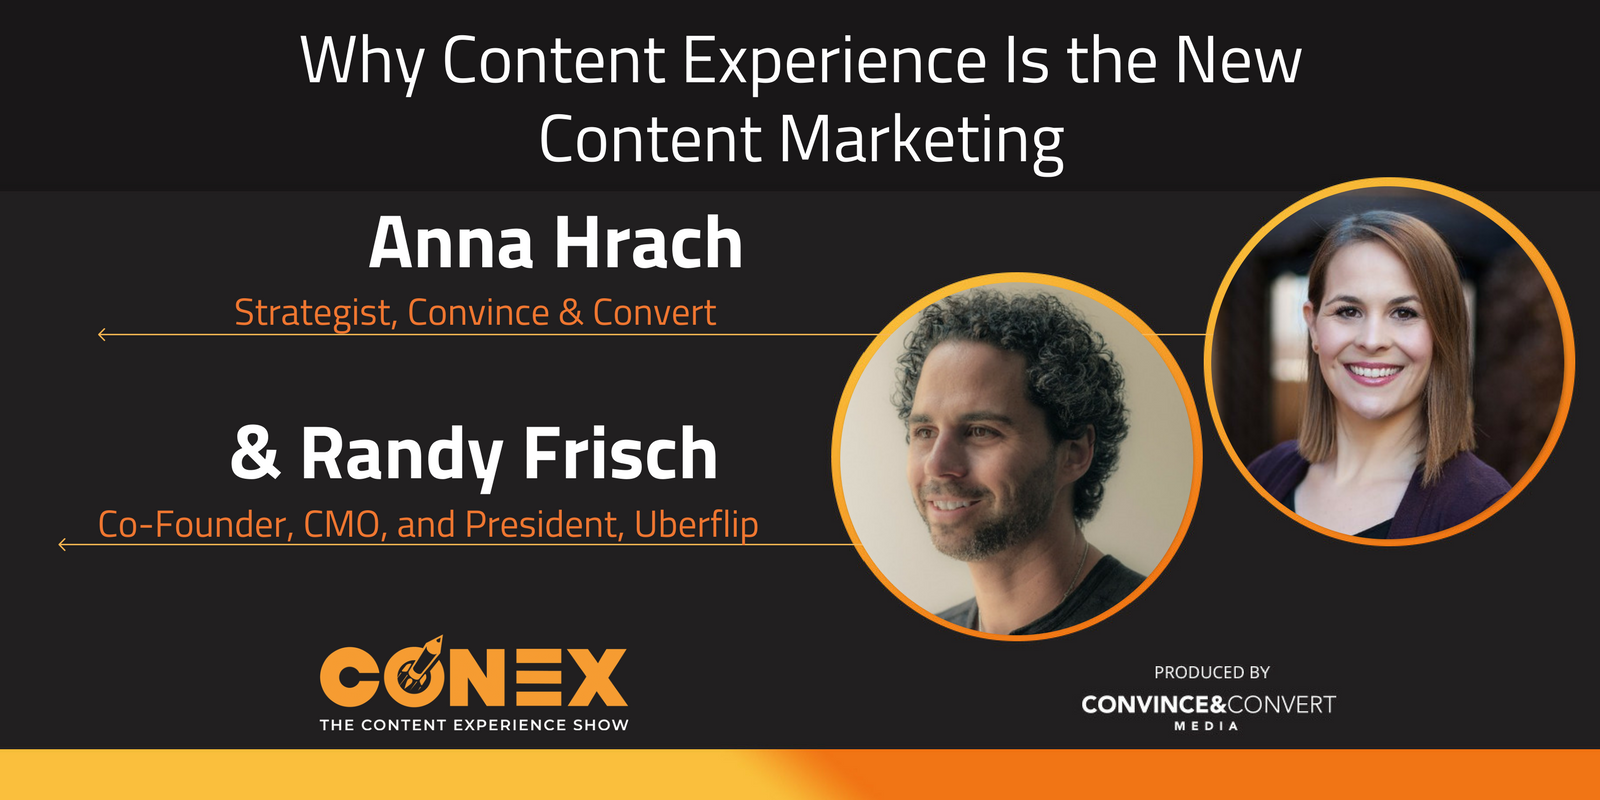 Why Content Experience Is the New Content Marketing